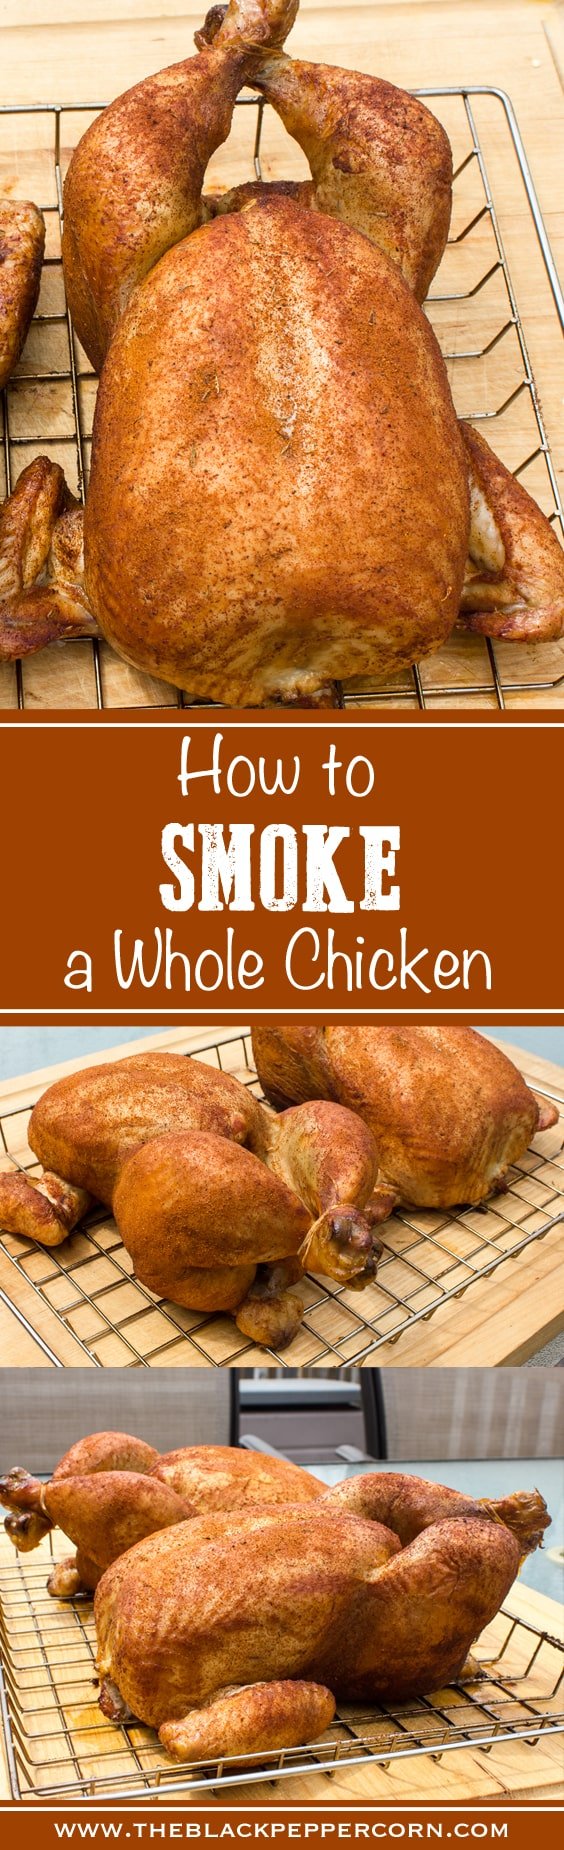 How to Smoke a Whole Chicken - in the Bradley Electric Smoker